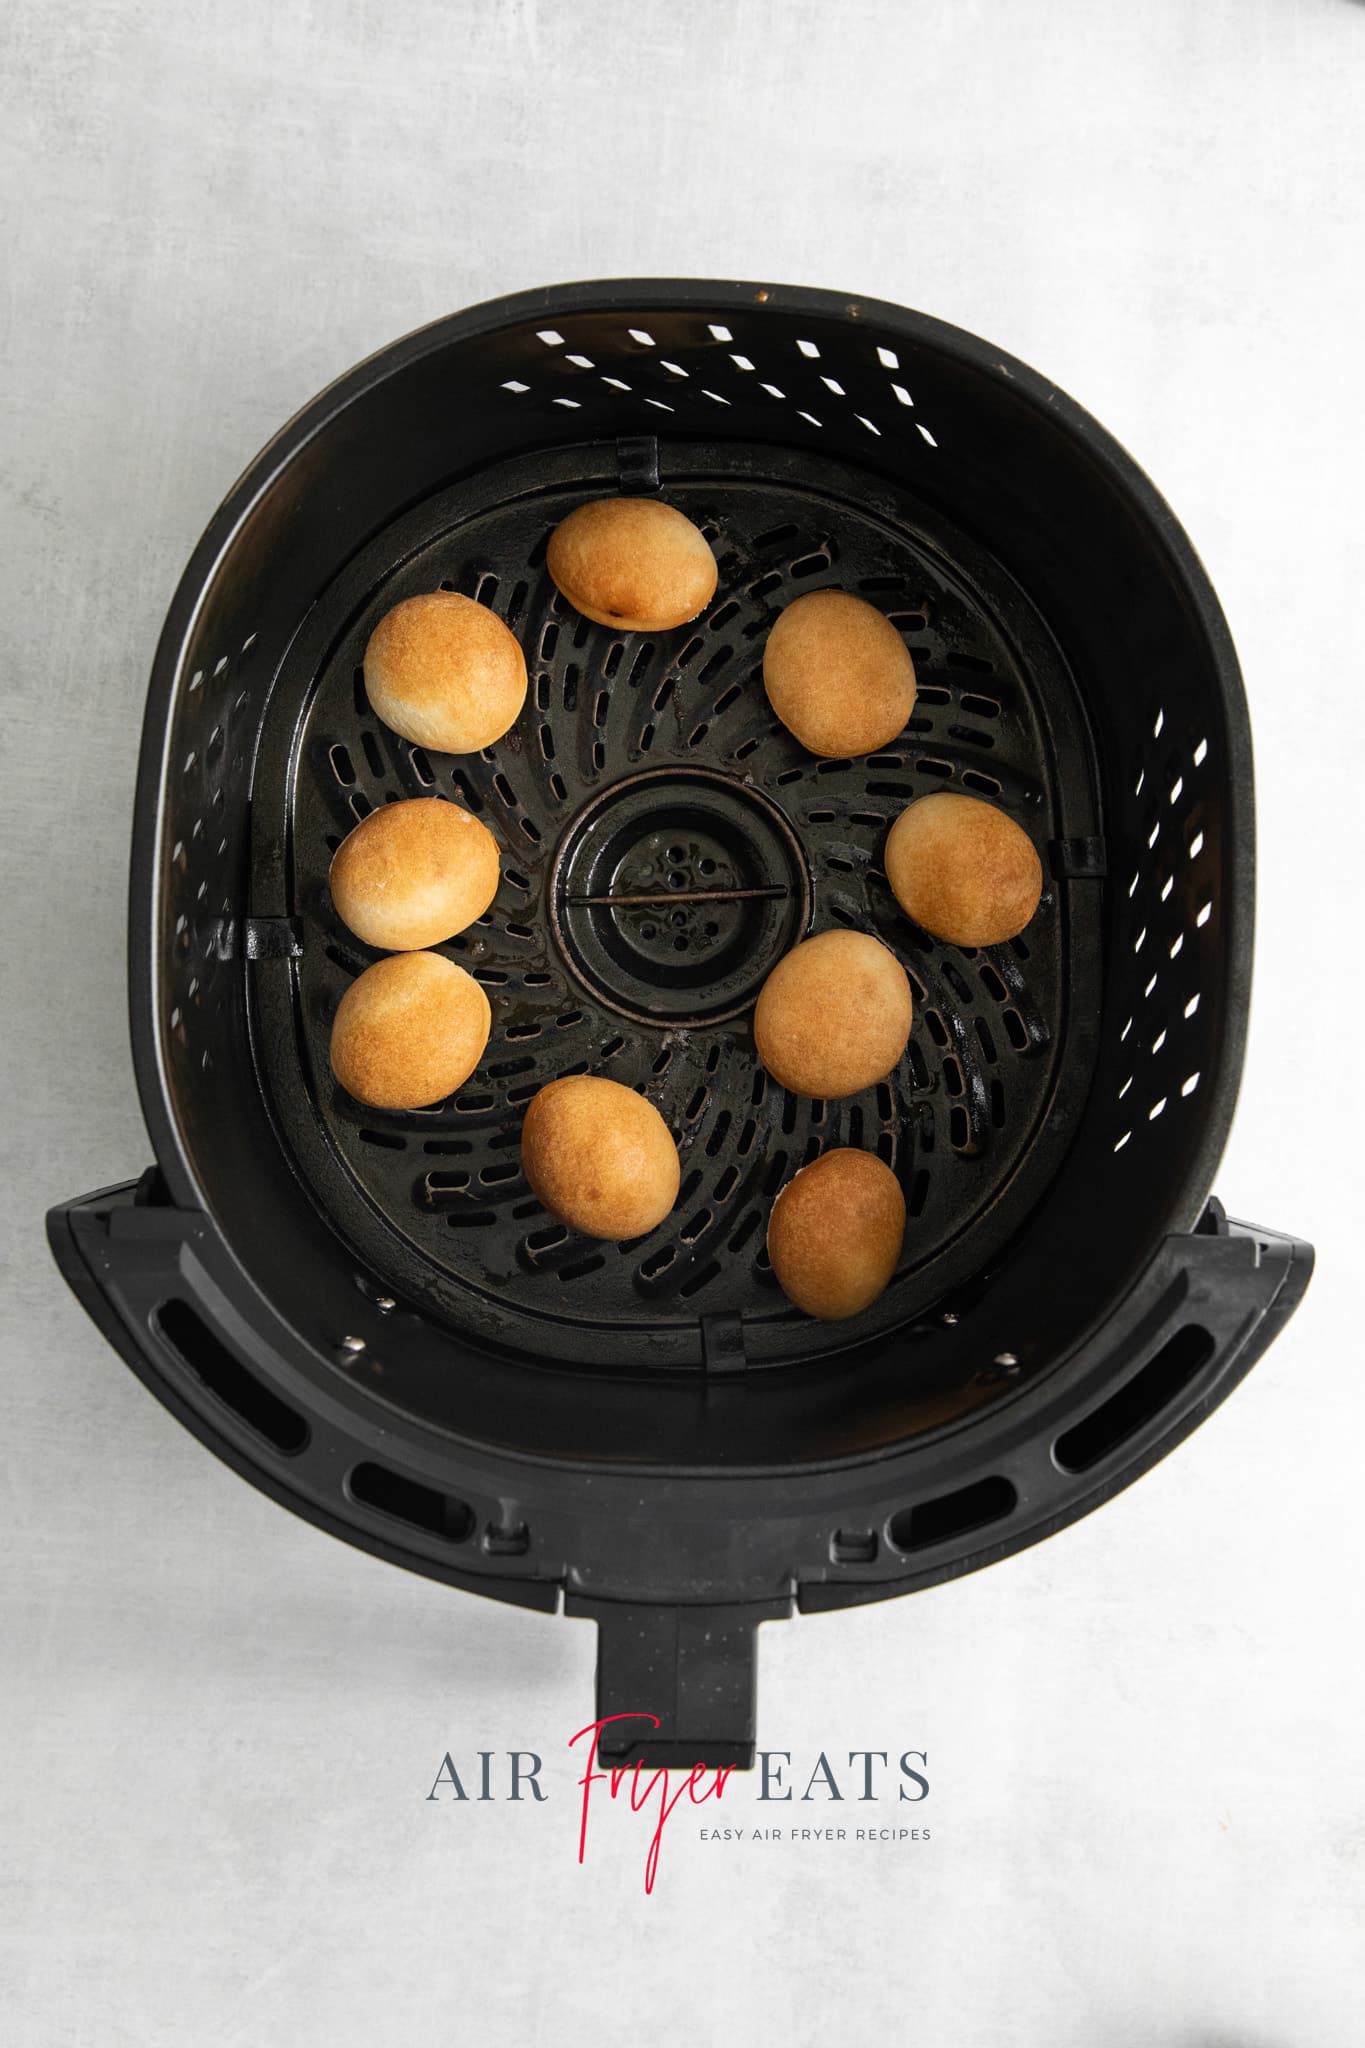 Top view photo of an air fryer basket filled with golden brown donut holes.